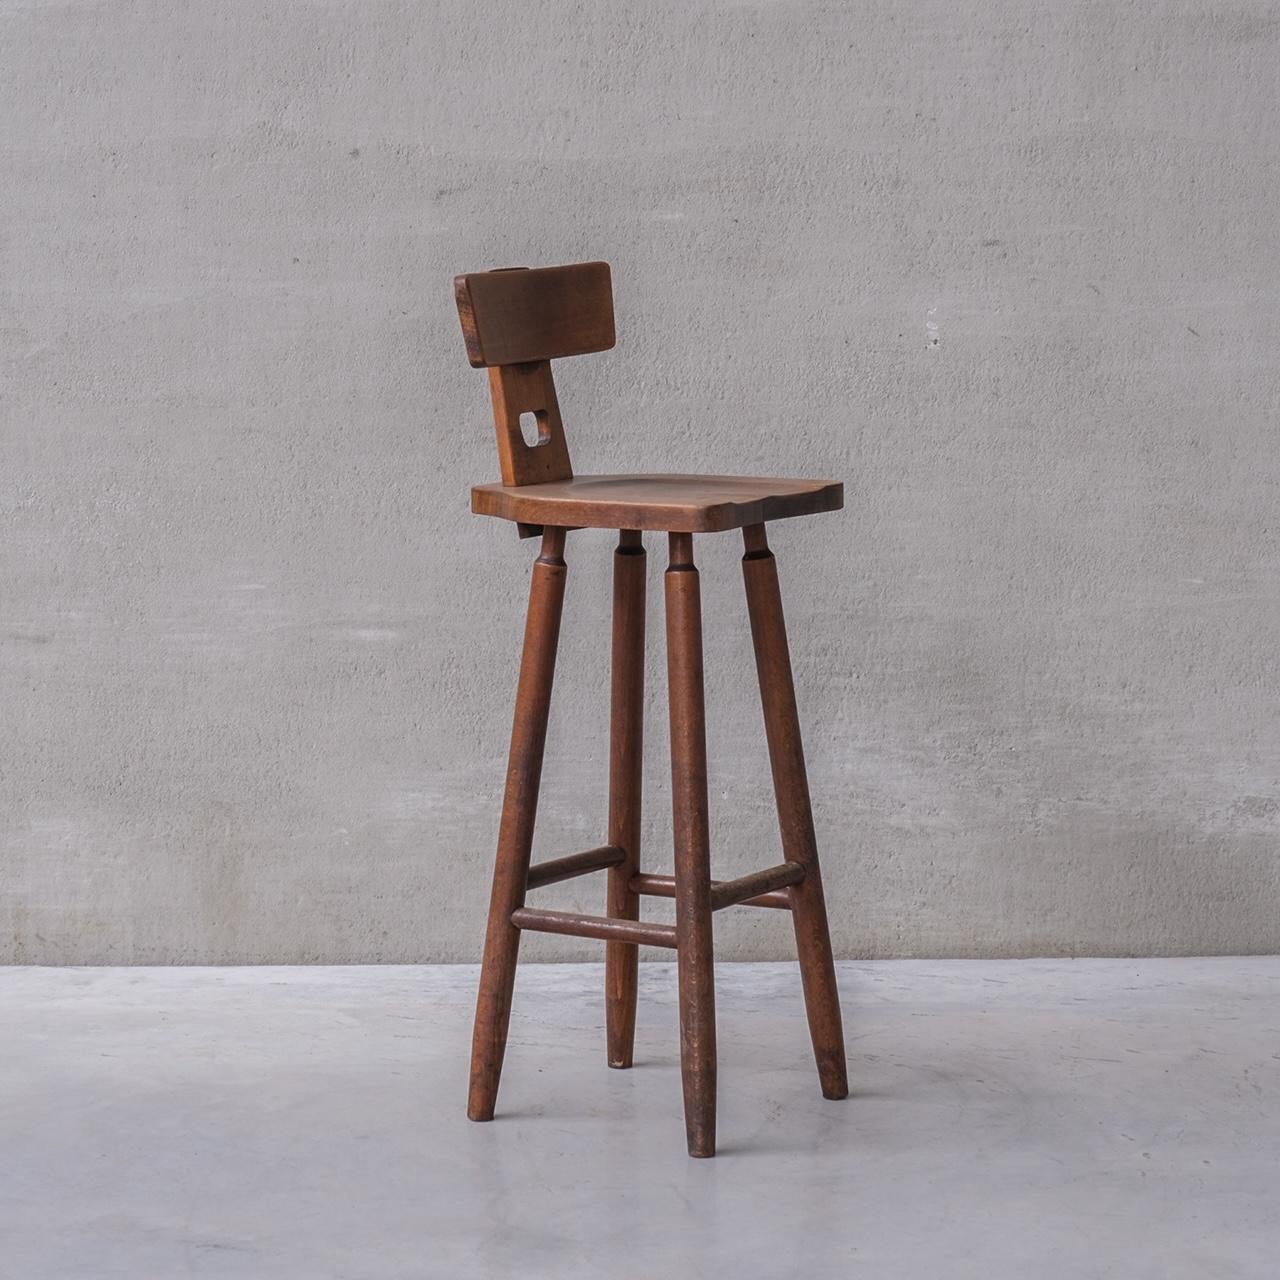 20th Century Brutalist Wooden Dutch Midcentury Bar Stools '20 Available'